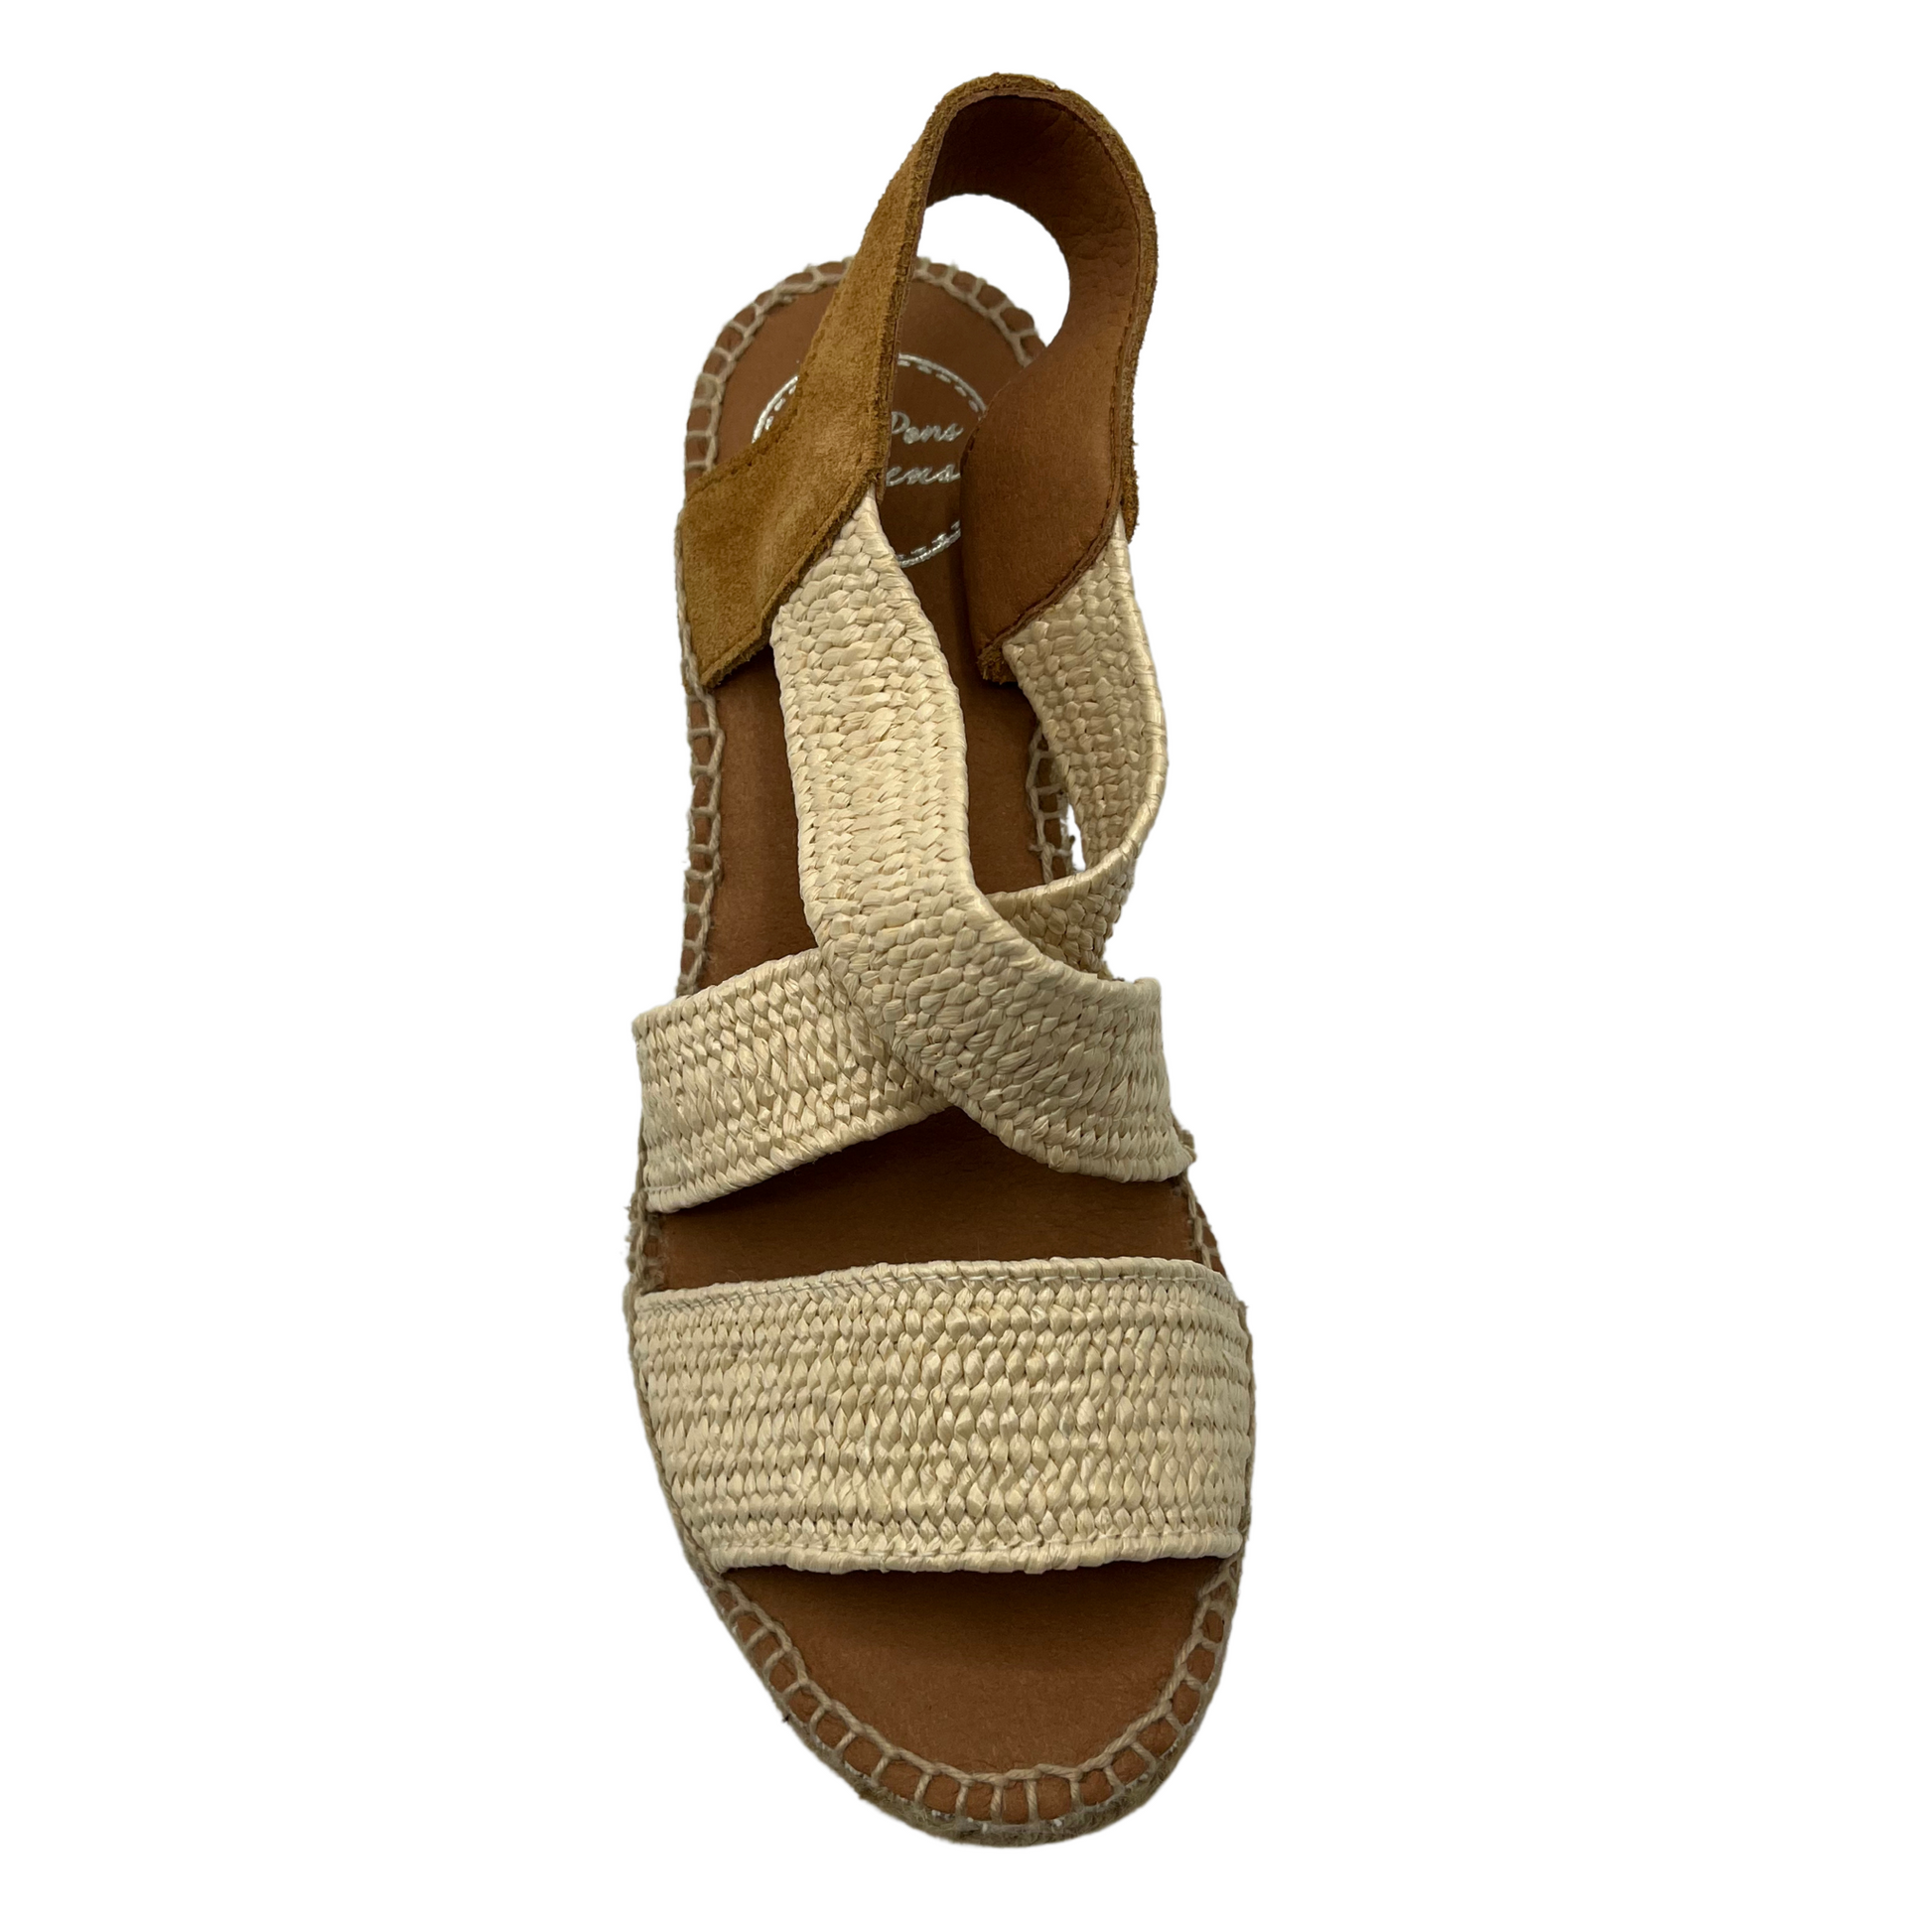 Top view of wedge heeled sandal with cross over straps and suede sling back